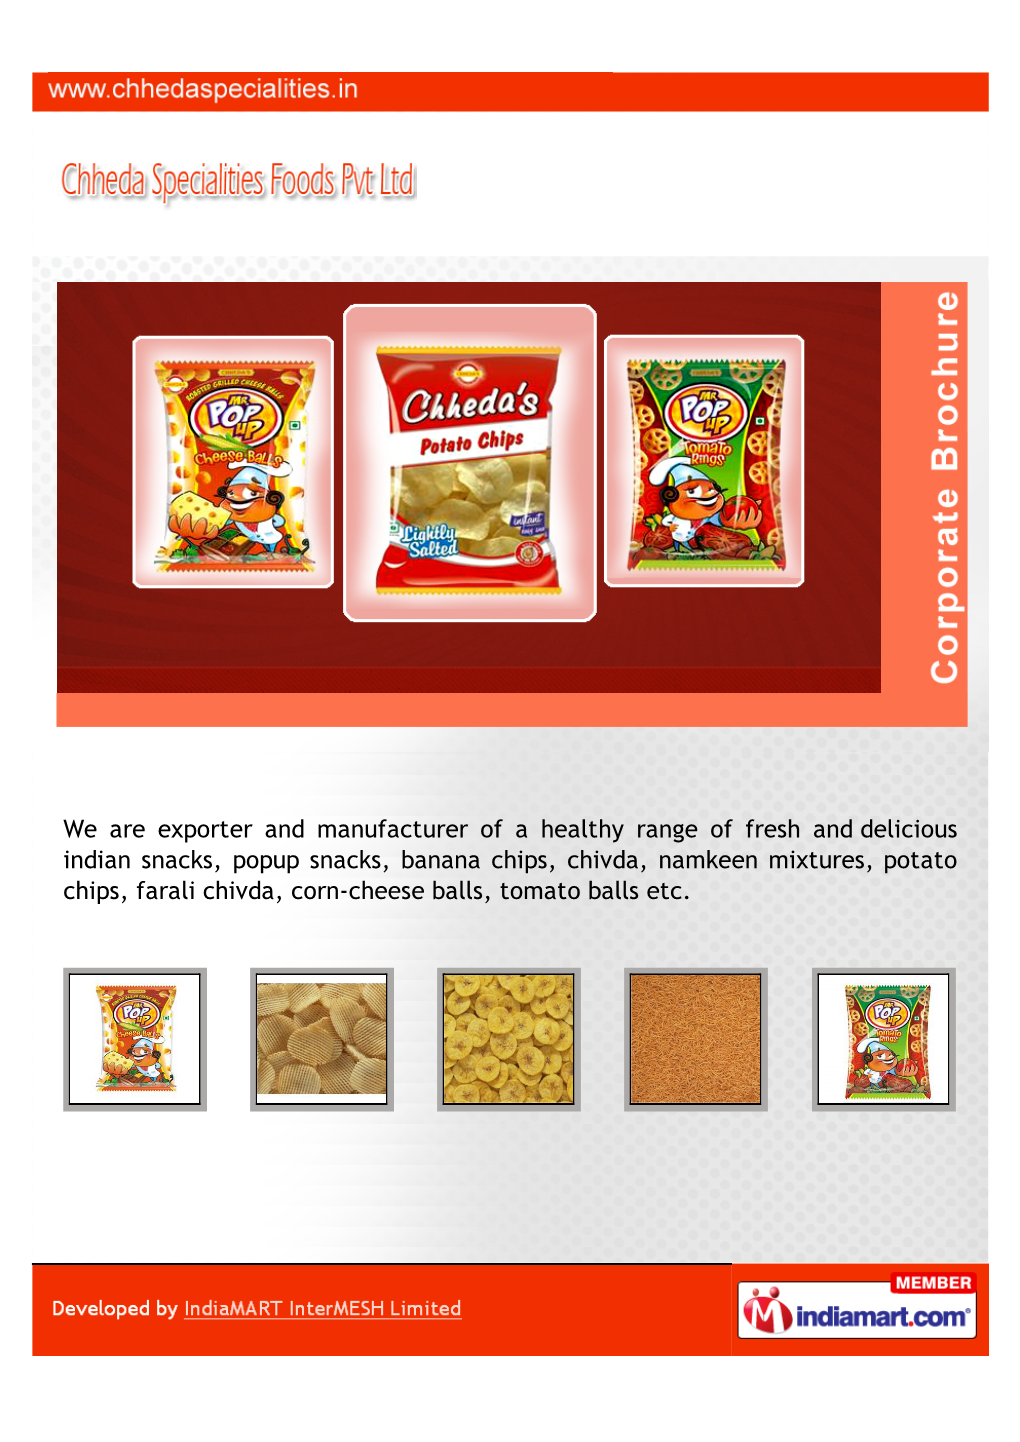 We Are Exporter and Manufacturer of a Healthy Range of Fresh And